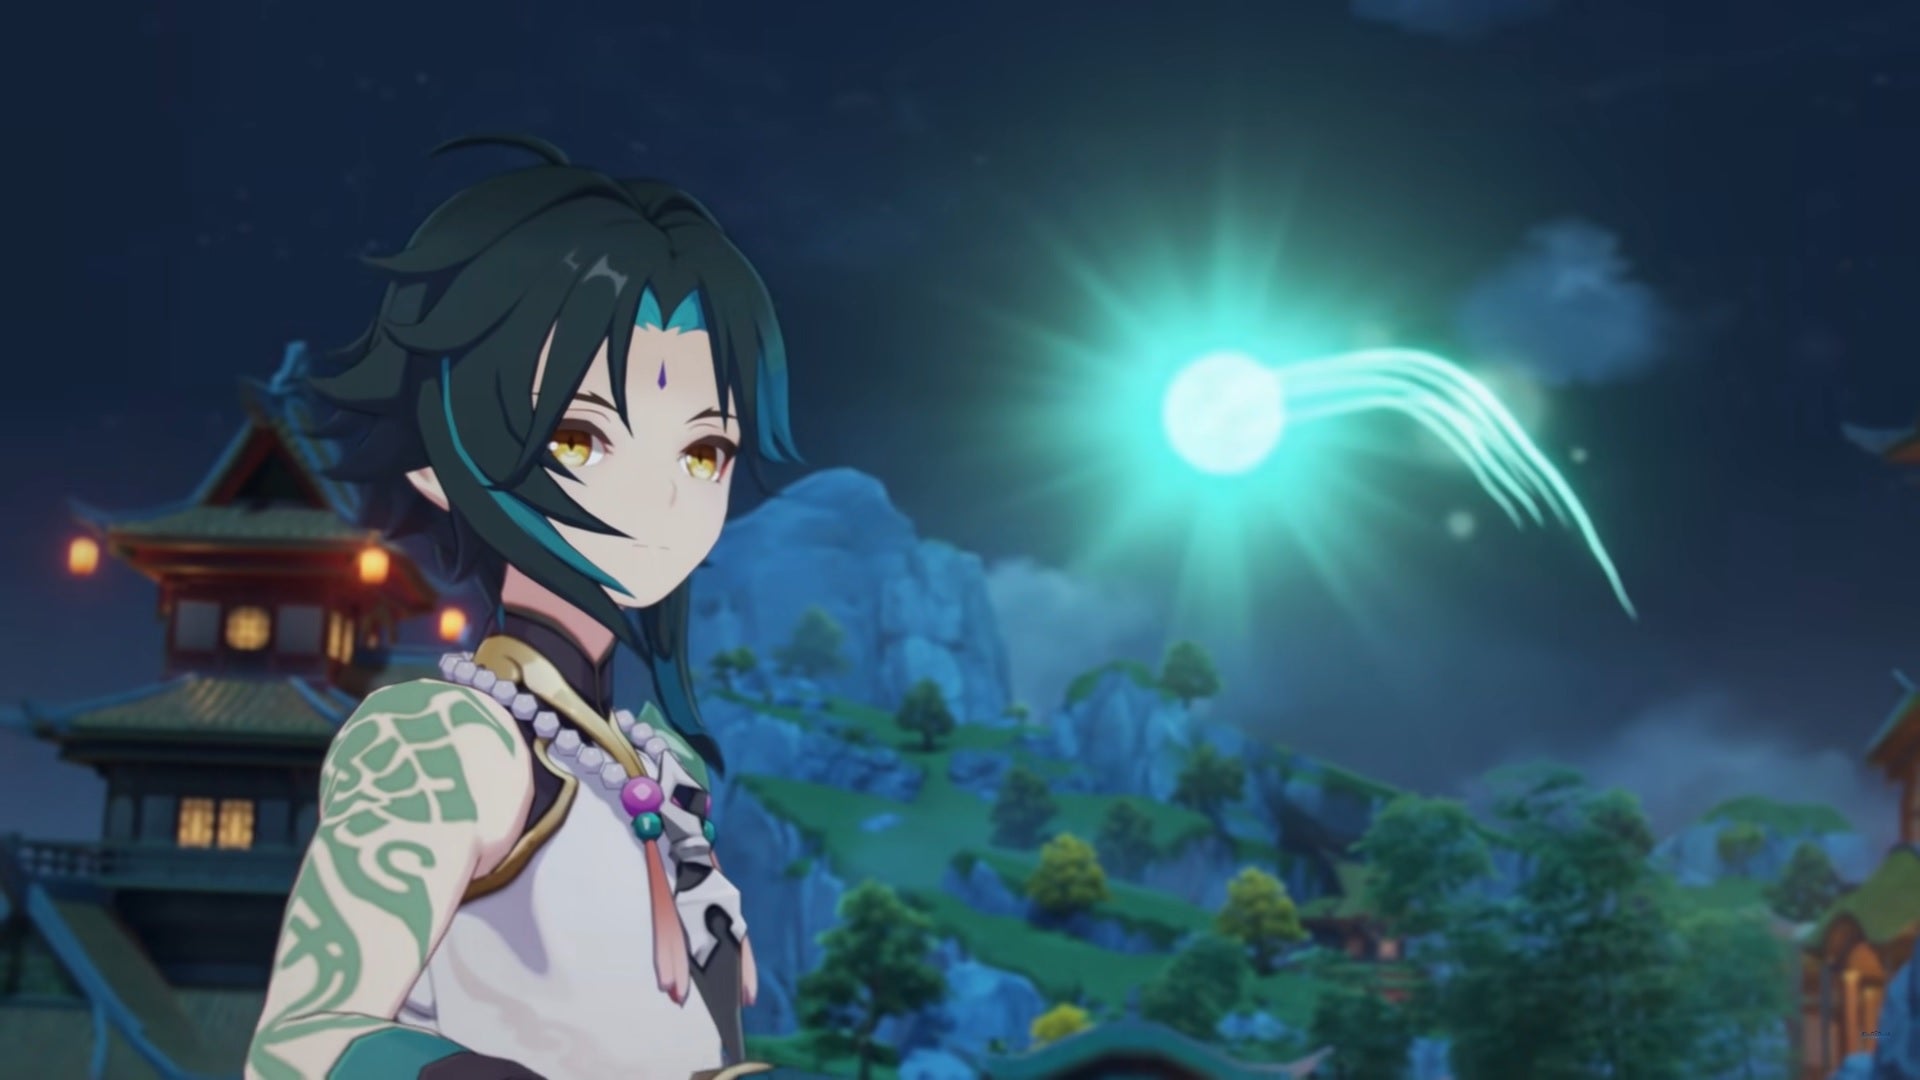 Xiao looking at some strange energy, as part of the version 1.3 trailer for Genshin Impact